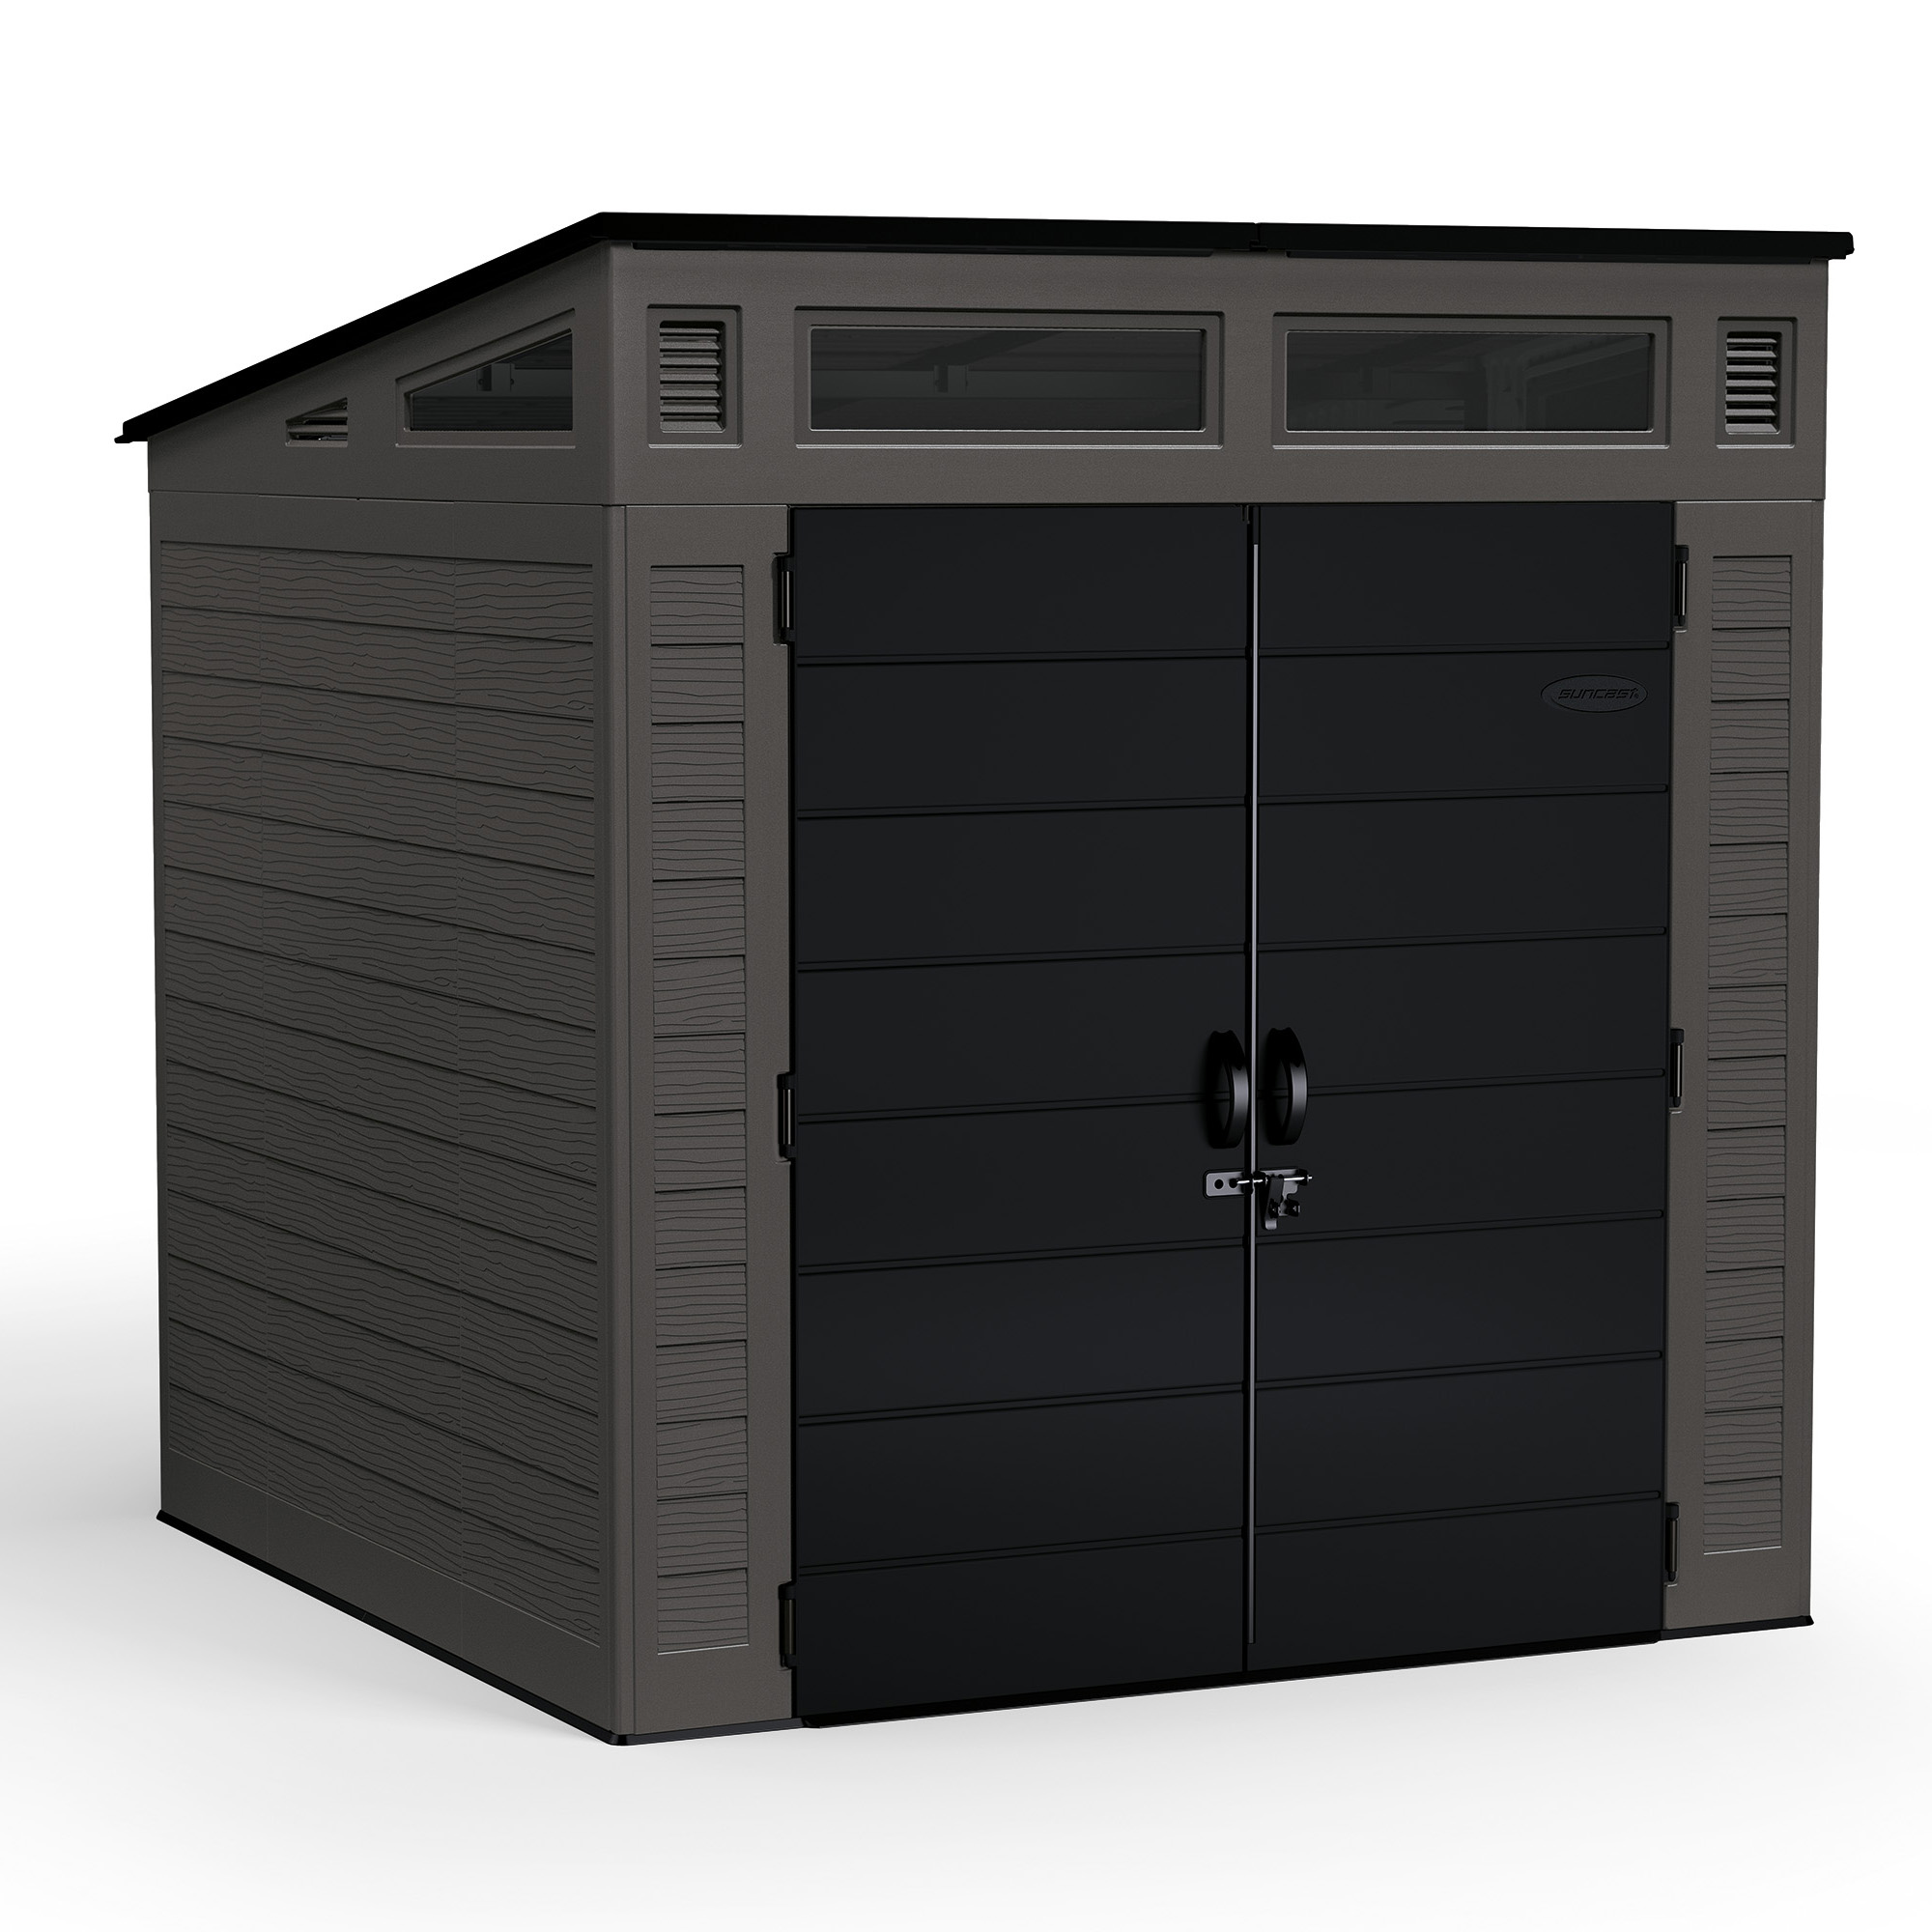 suncast 7x7 modernist resin storage shed - $749 shipped